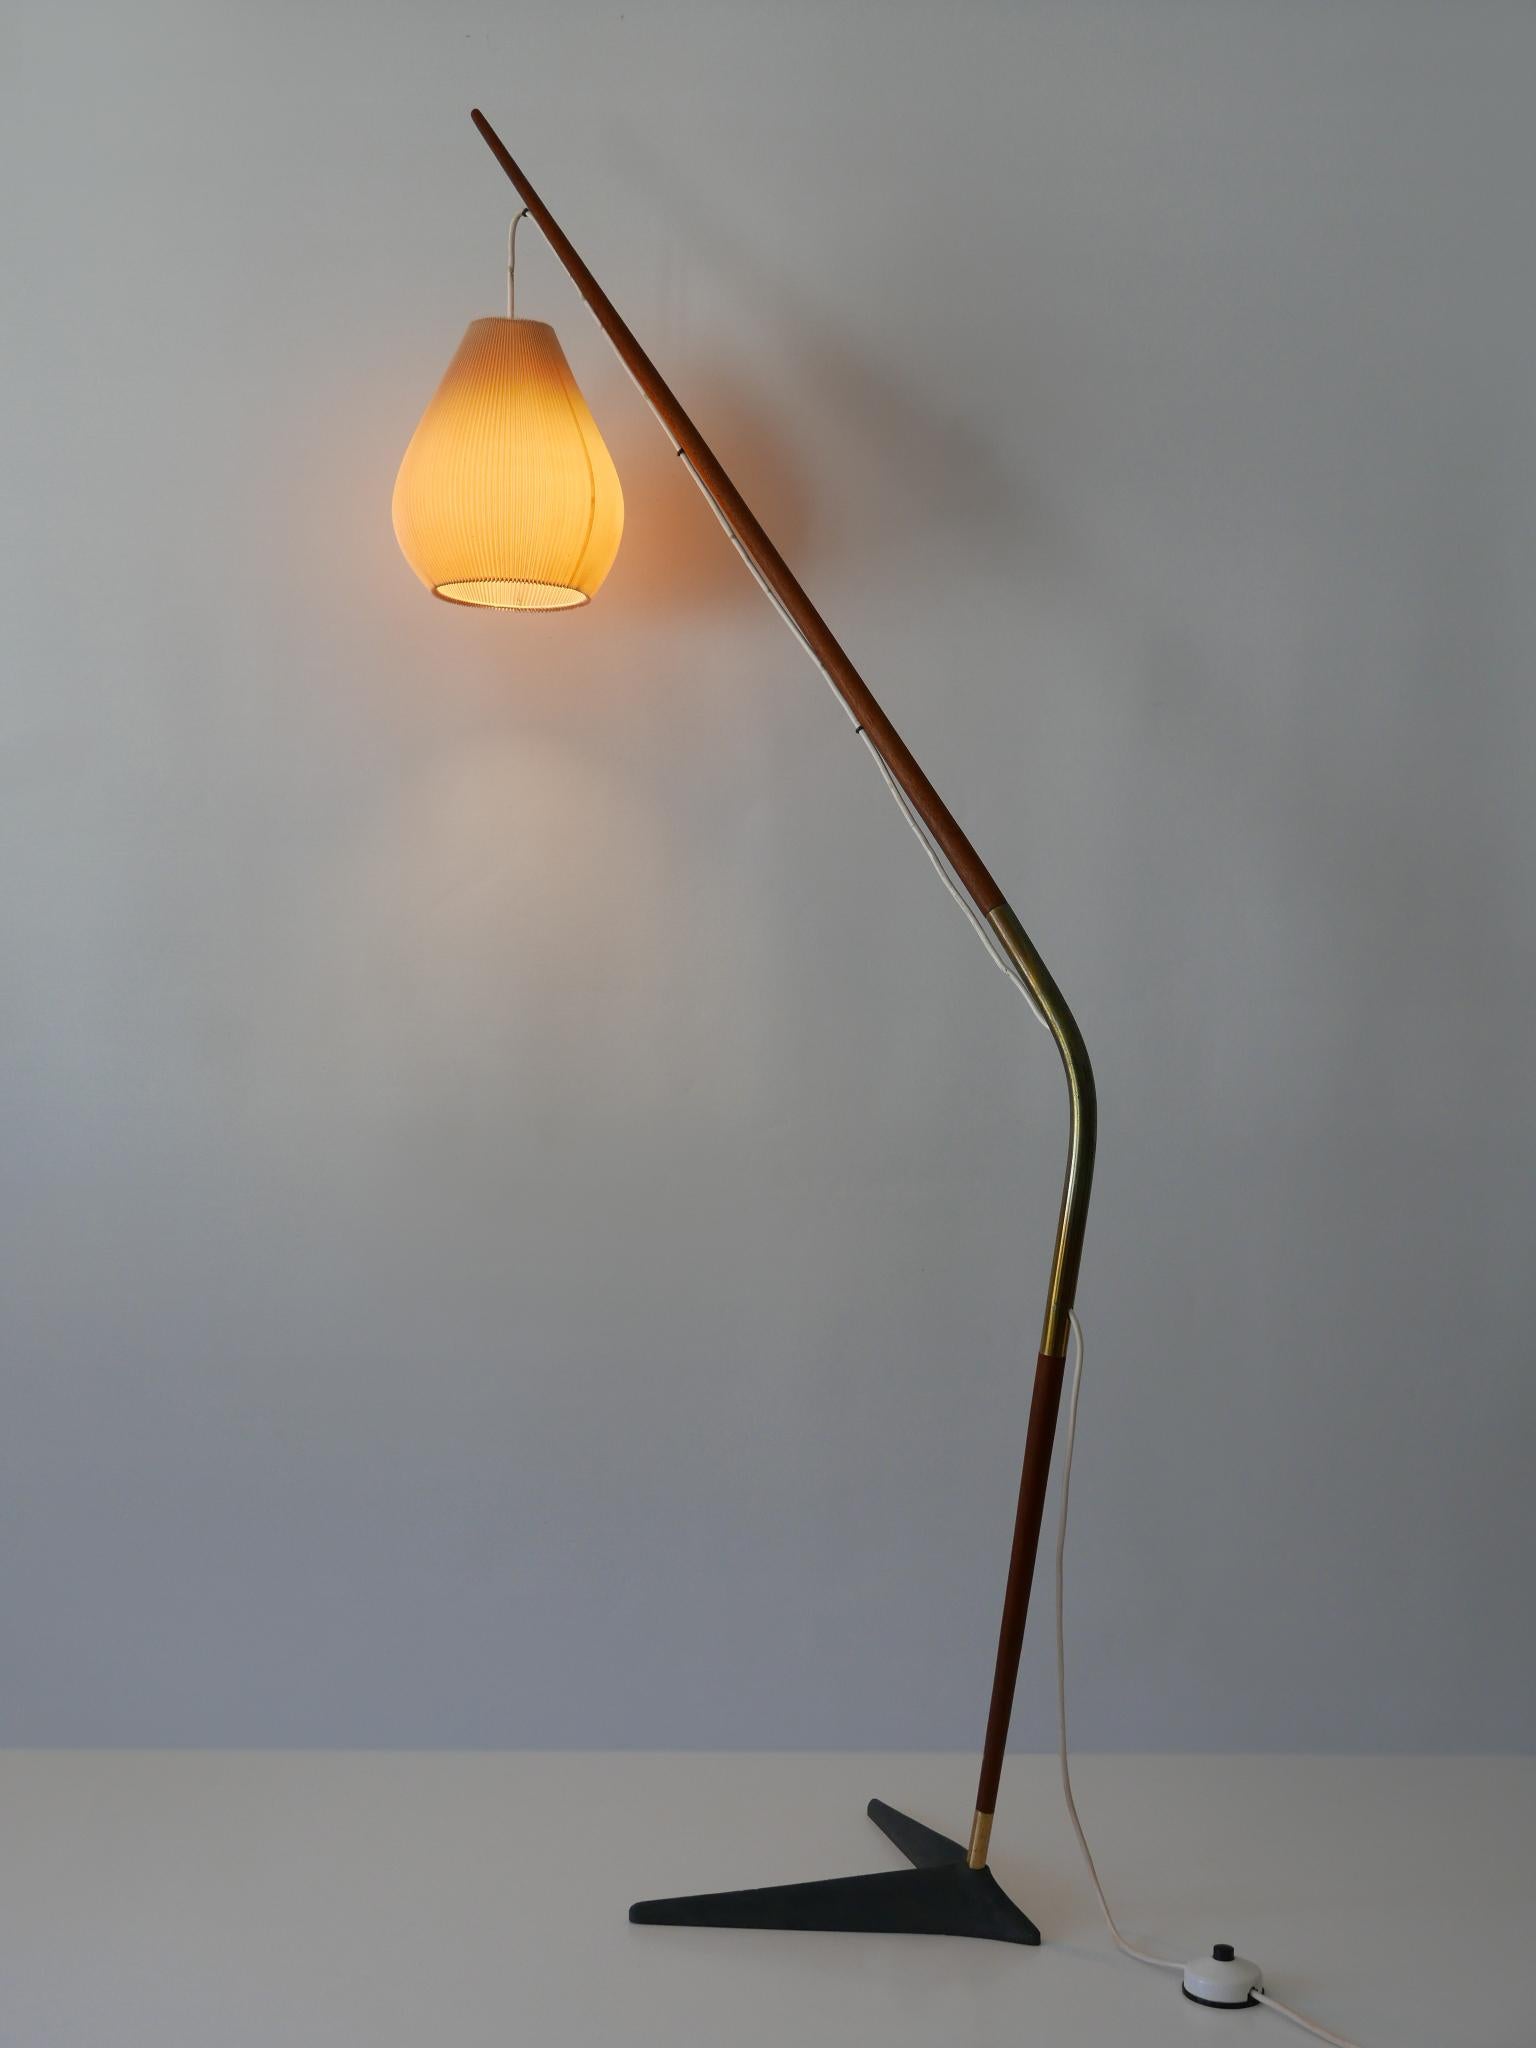 Exceptional 'Fishing Pole' Floor Lamp by Svend Aage Holm Sørensen Denmark 1950s For Sale 5